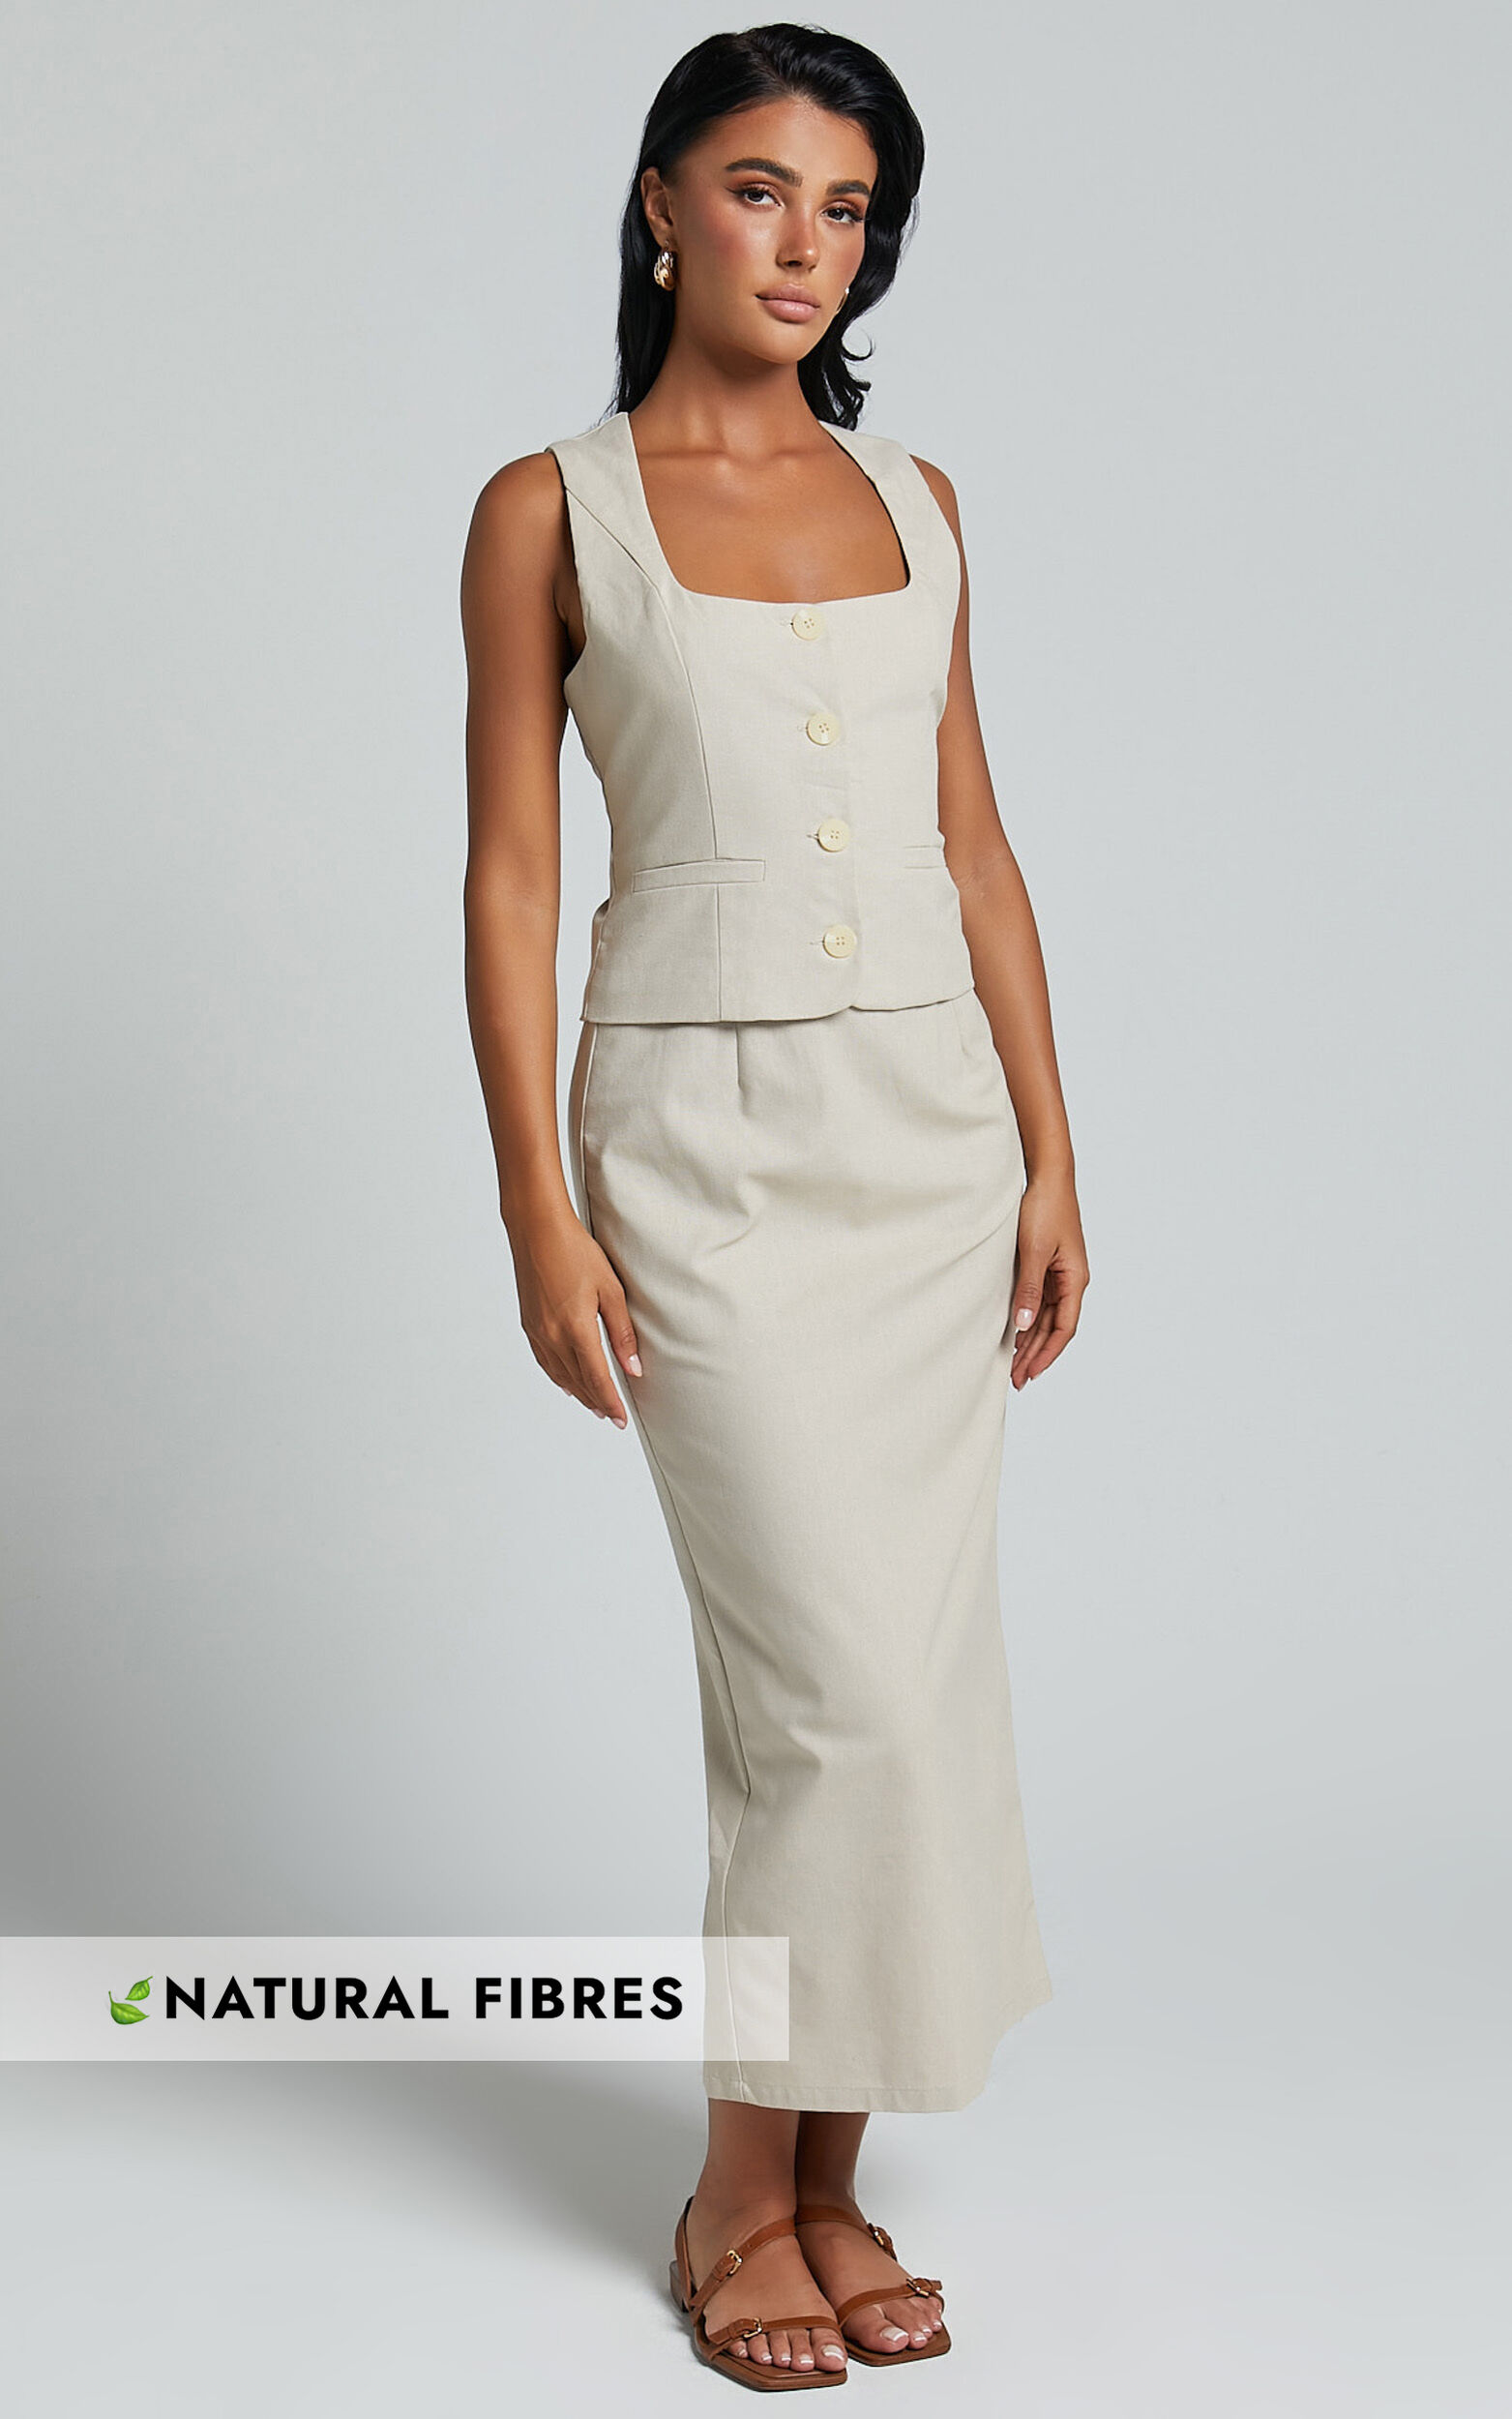 Elias Two Piece Set - Linen Look Square Neck Vest Top And Column Midi Skirt in Natural - 06, NEU1